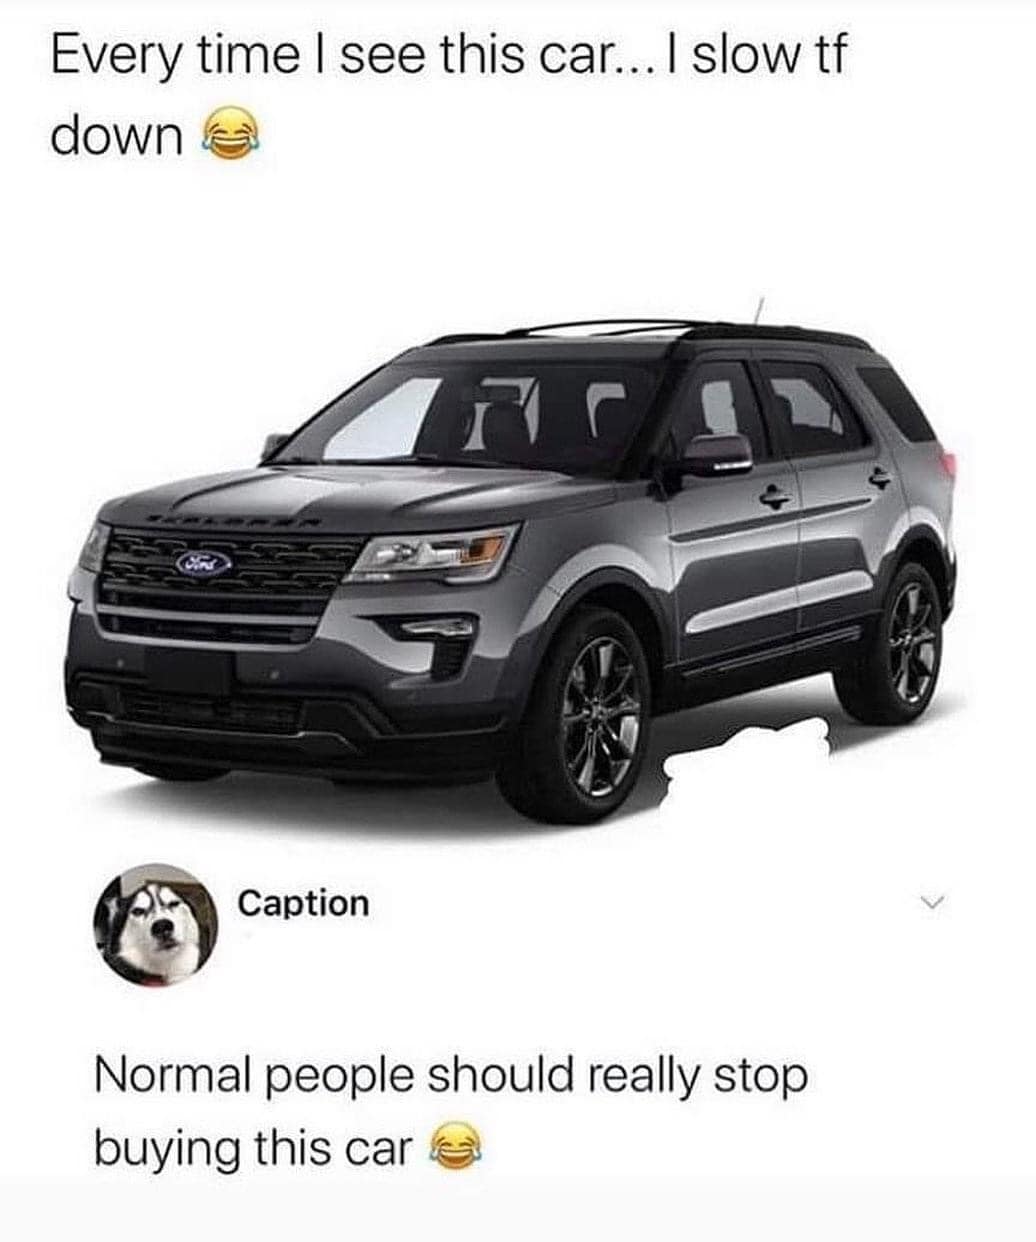 2019 ford explorer for sale - Every time I see this car... I slow tf down 1 Caption Normal people should really stop buying this car